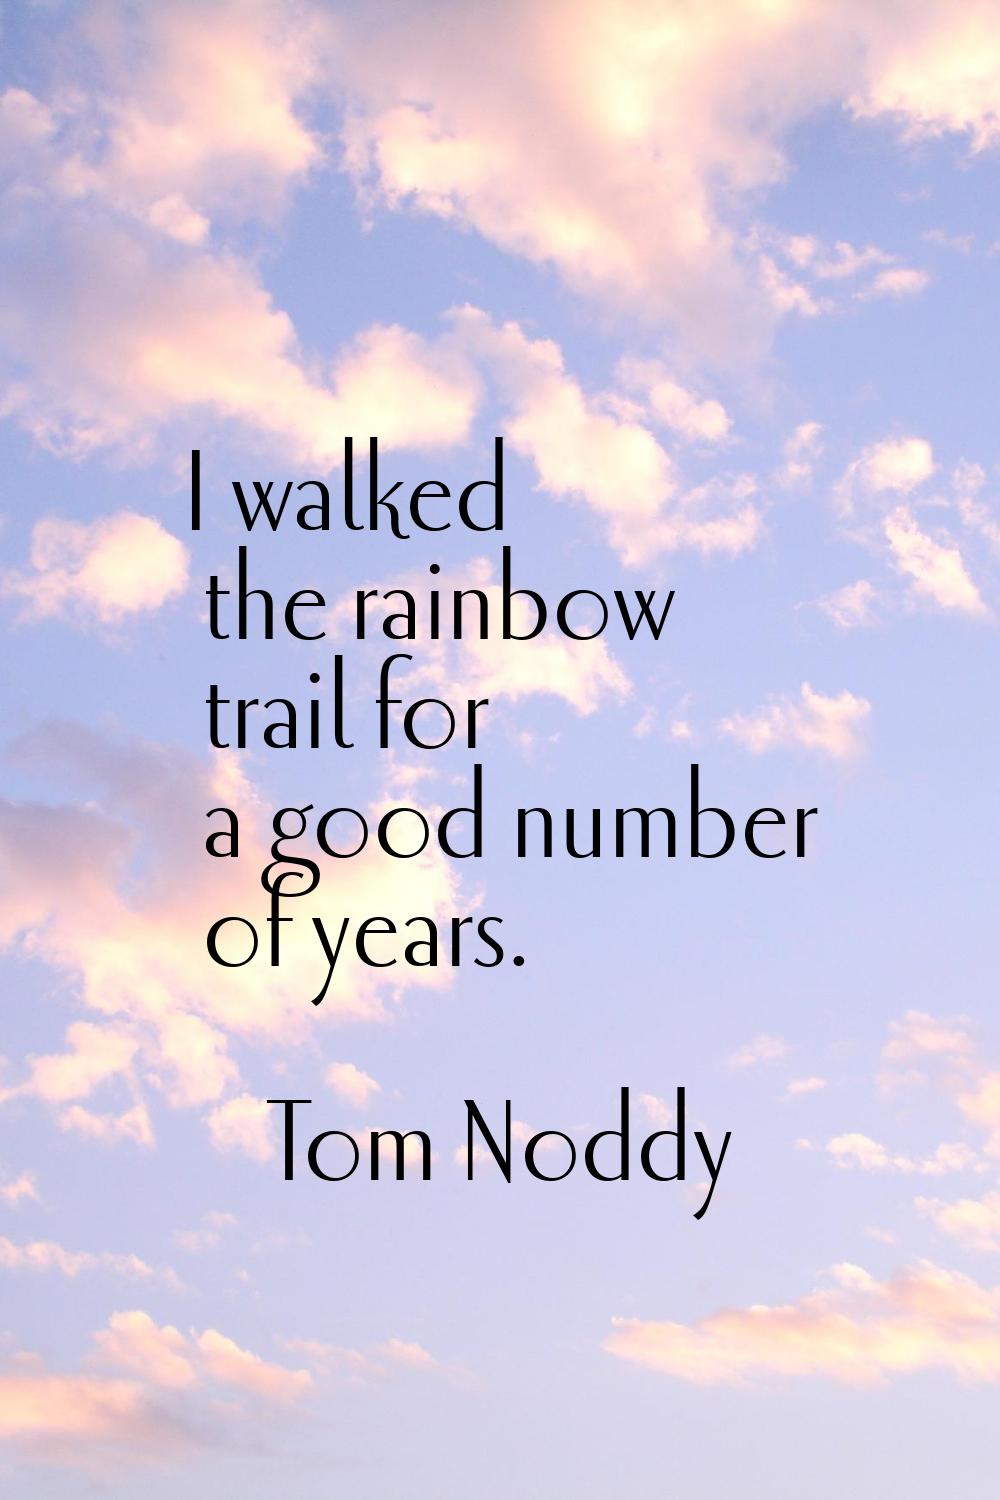 I walked the rainbow trail for a good number of years.